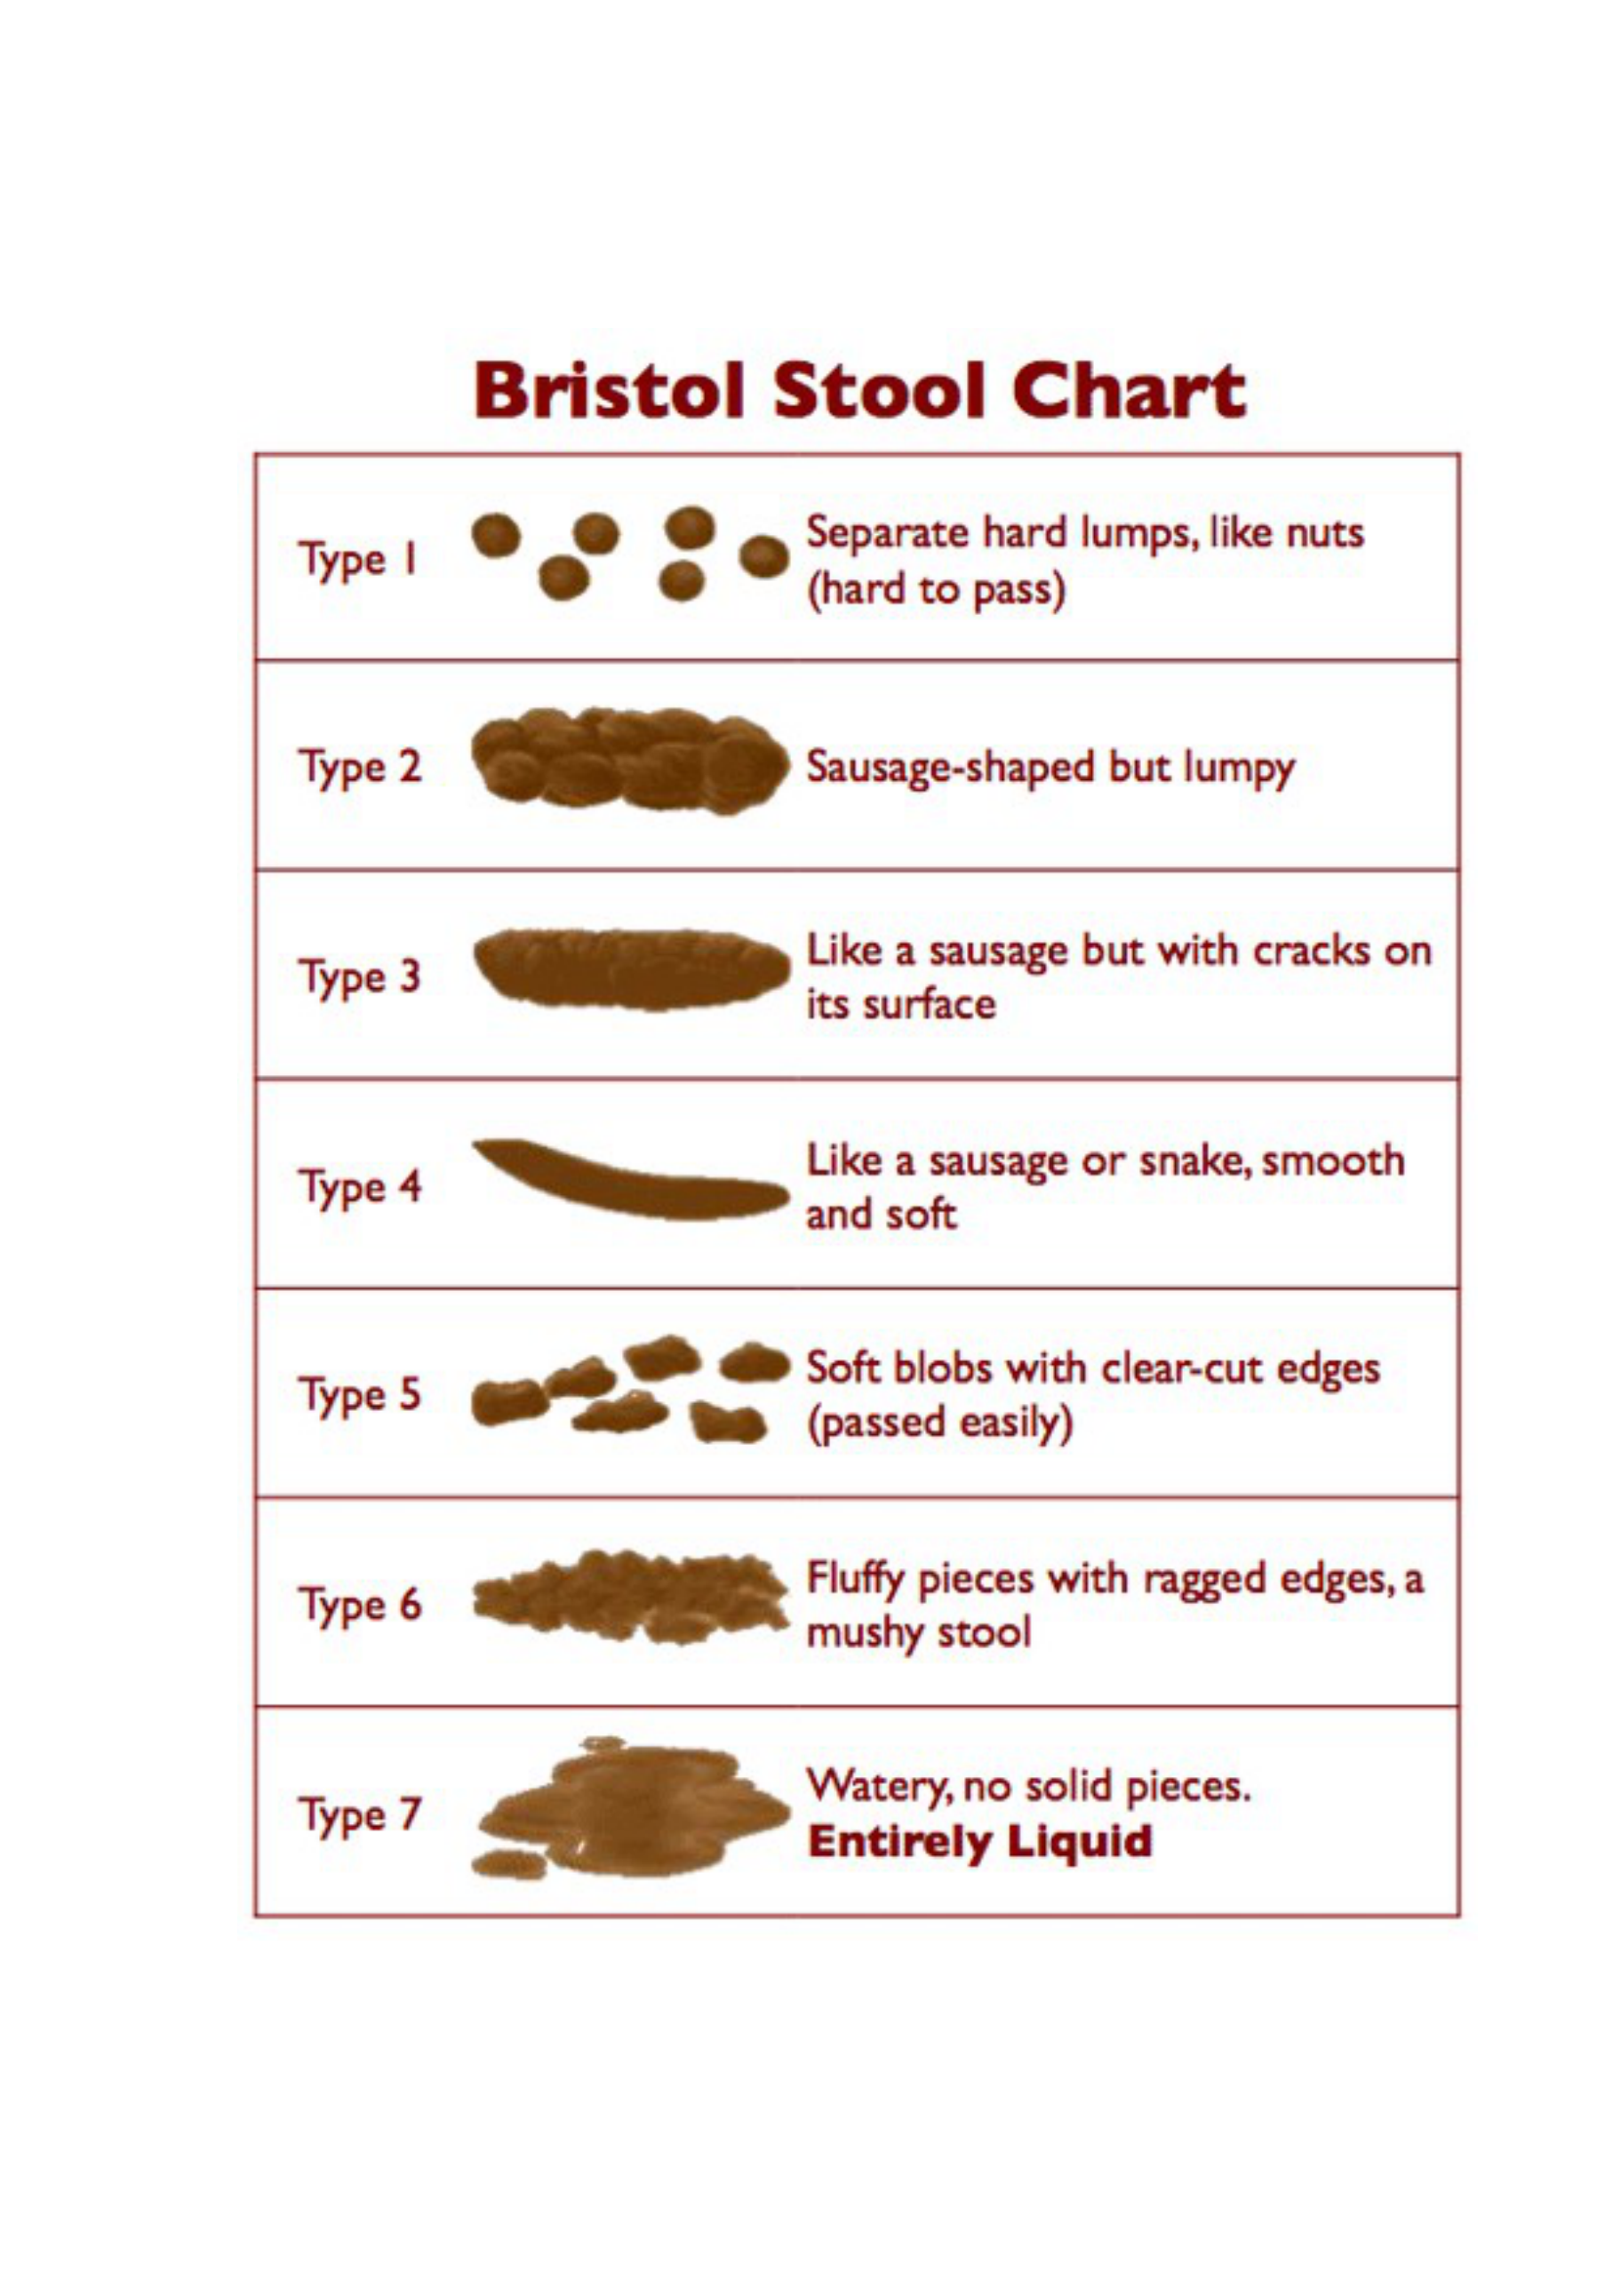 Stool Color Guide and Chart - Edit, Fill, Sign Online | Handypdf